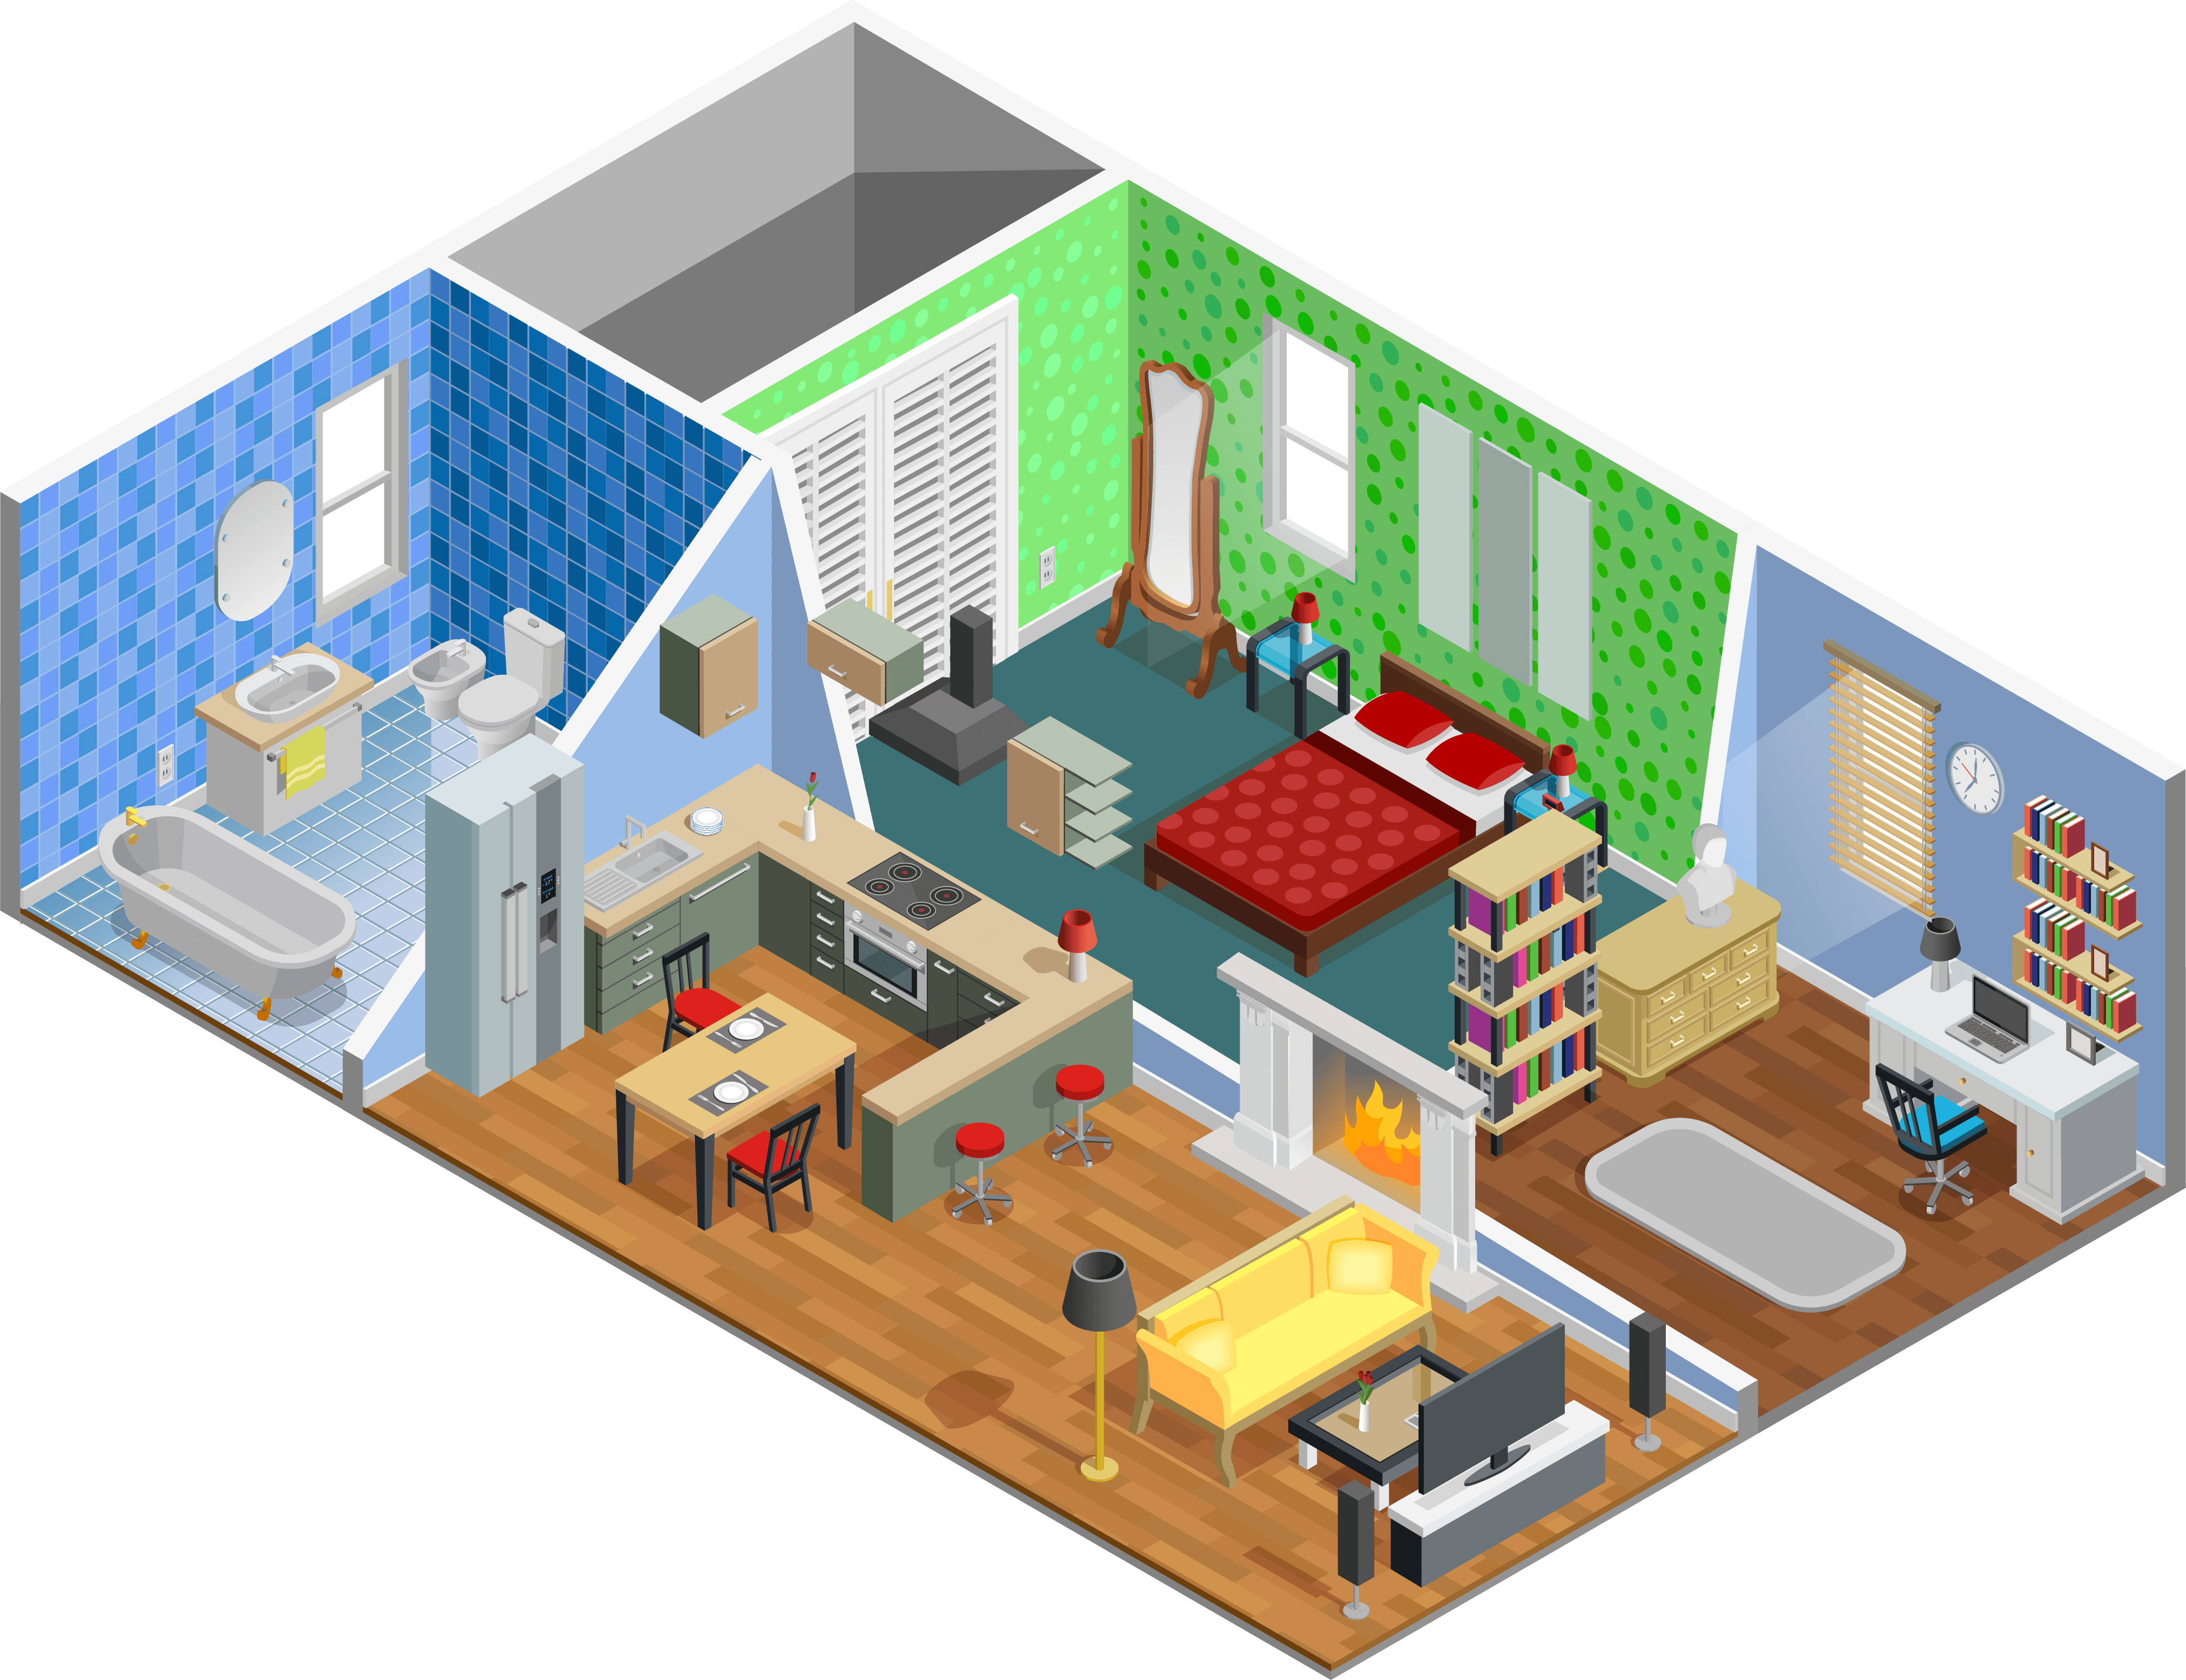 Picture of the inside of a house without walls showing interior design.